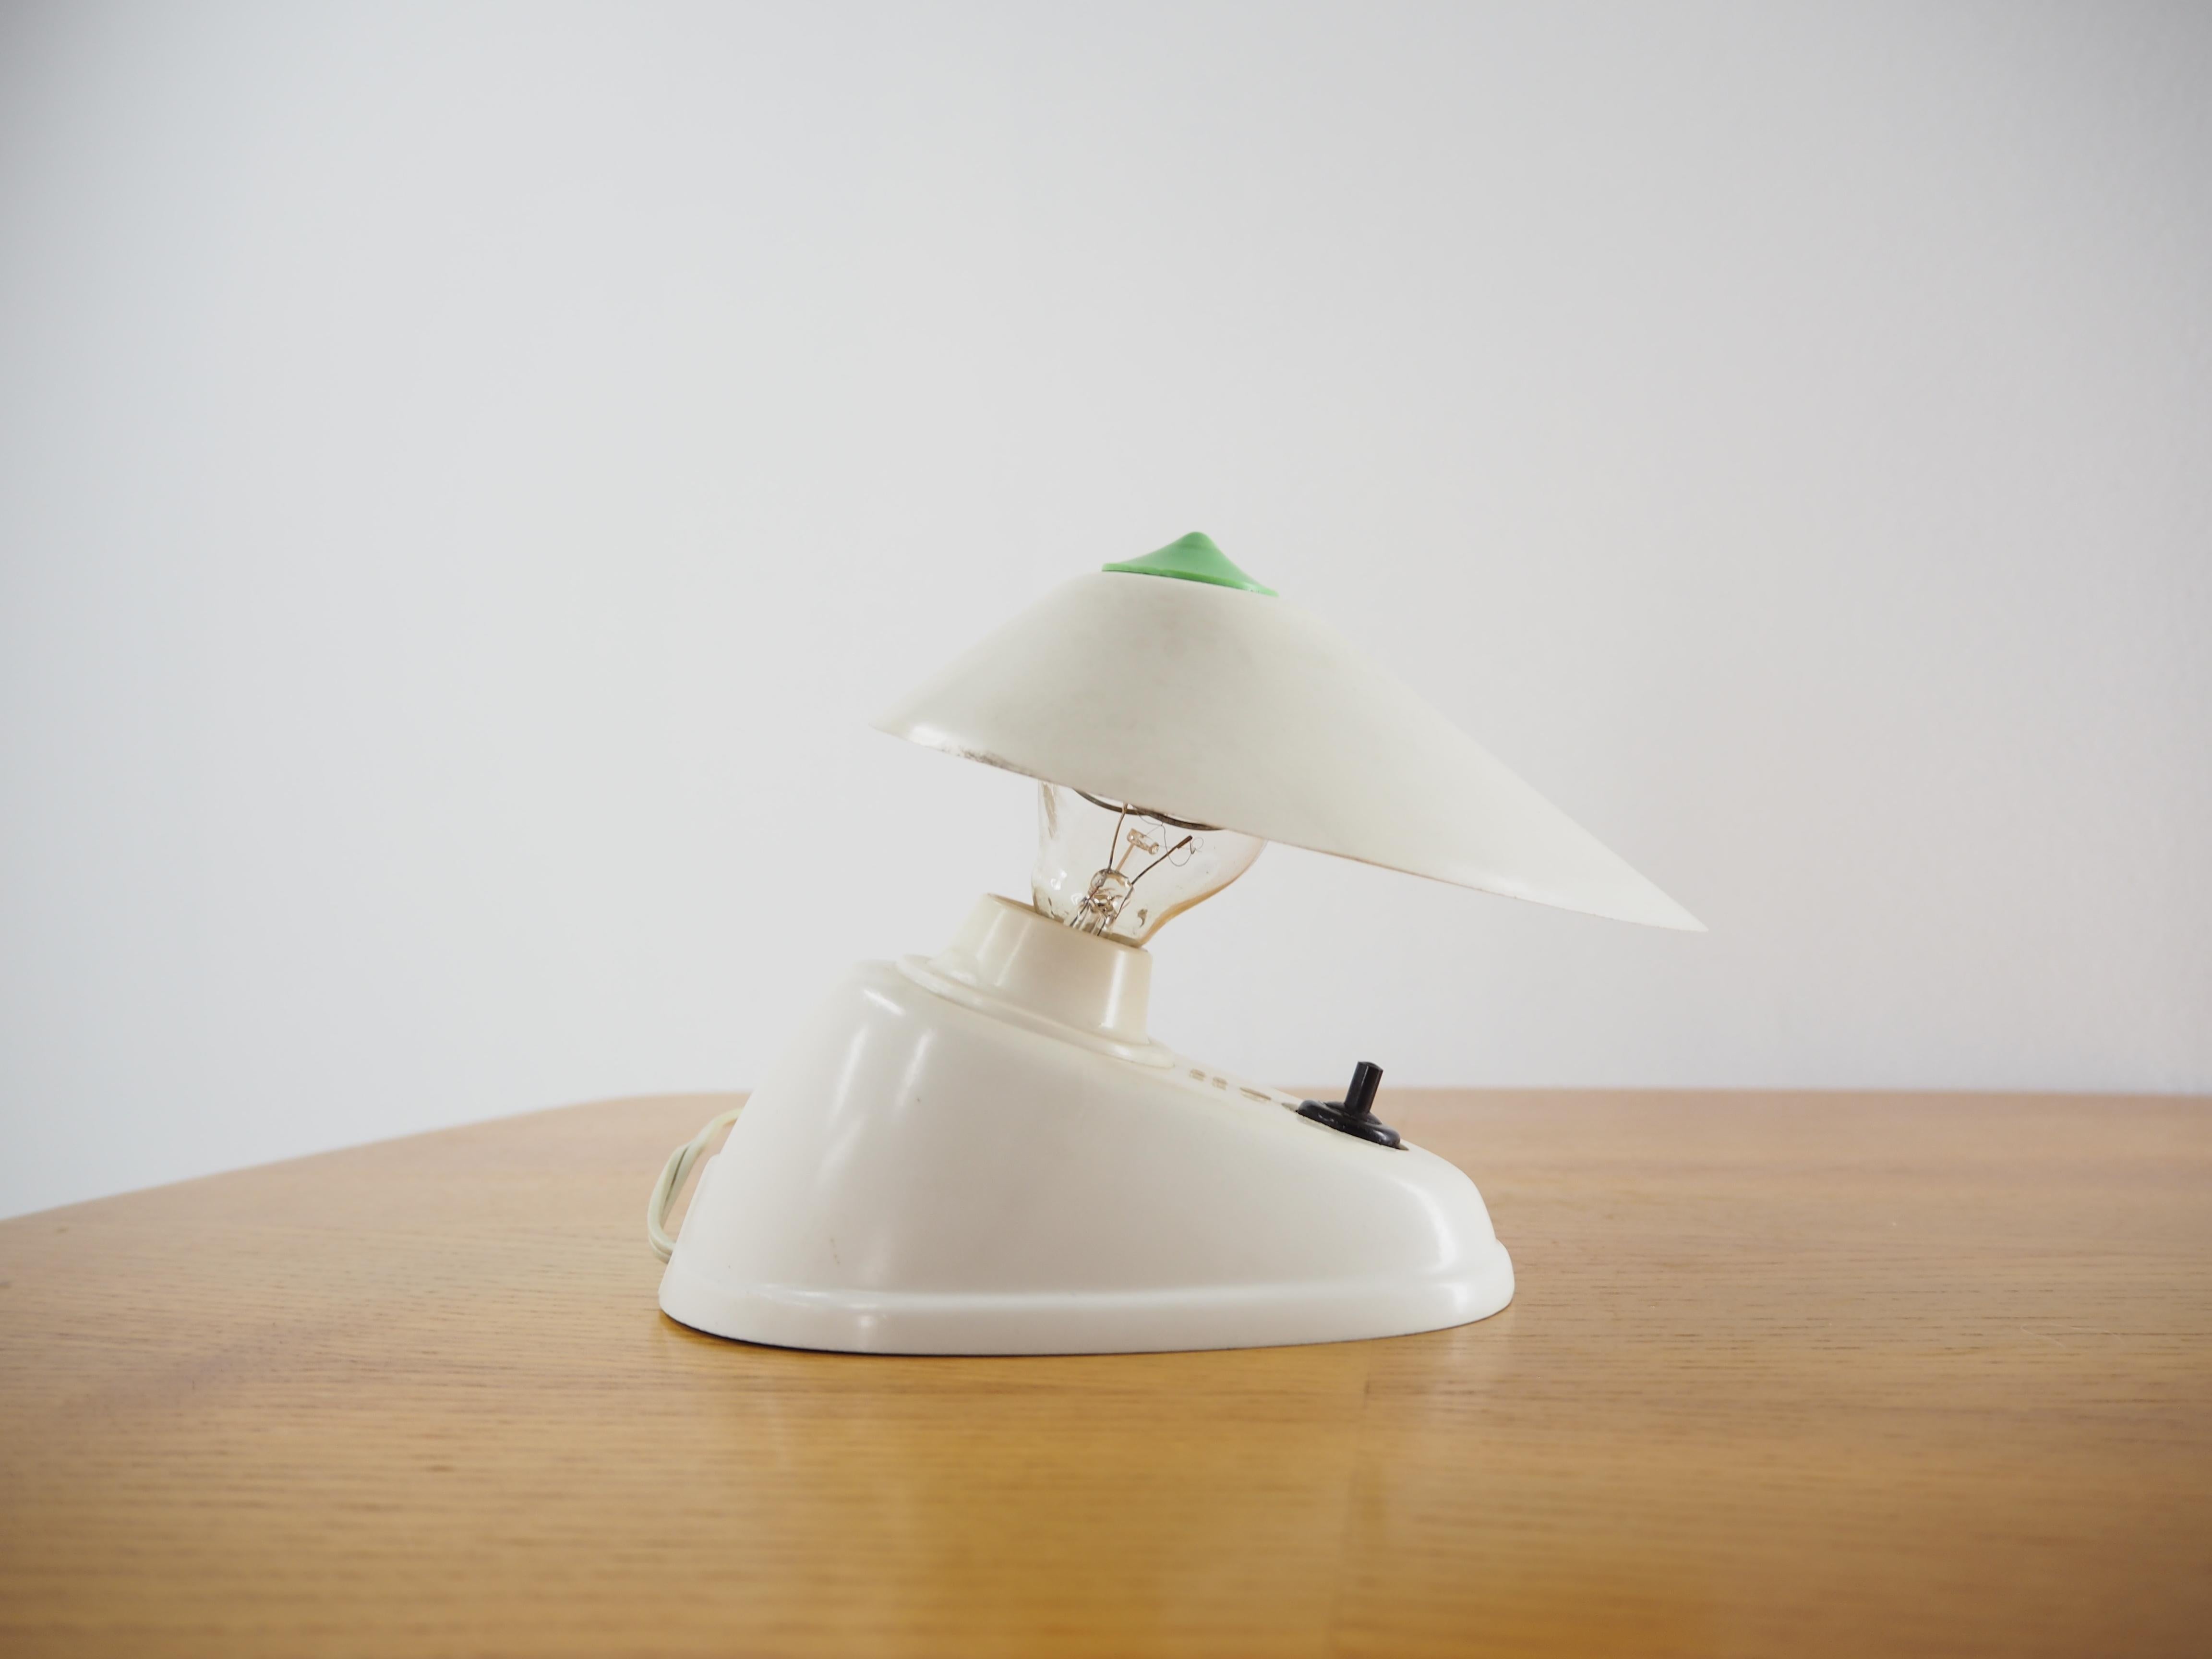 - Small Bakelite table or wall lamp with adjustable shade. 
- Good original condition.
- White Bakelite 
- Electric is original 195cm long.
- Fully functional
- On shade little stain on photo. 
   